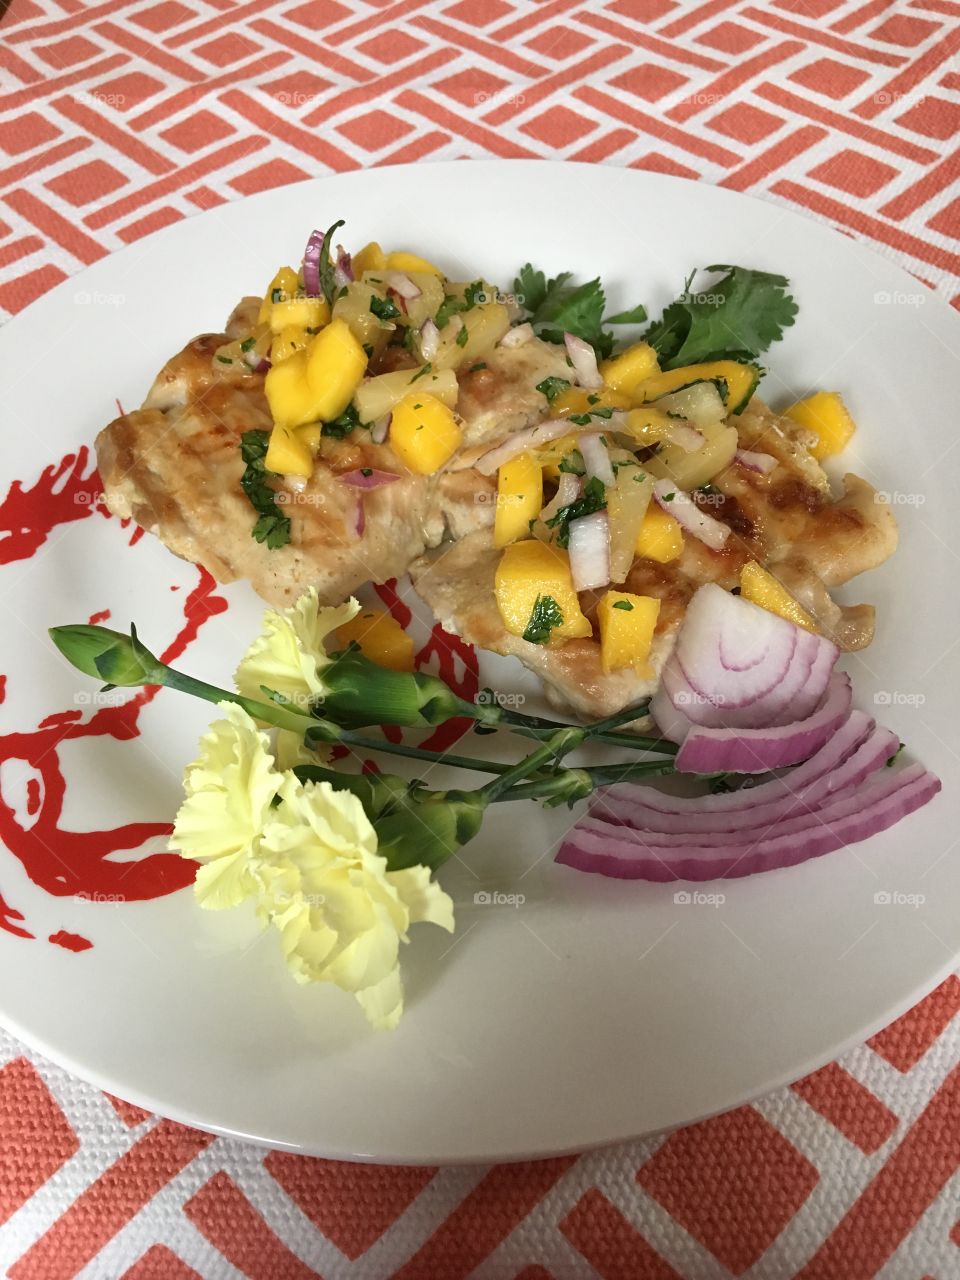 Garlic and ginger braised chicken thighs with pineapple mango salsa. 